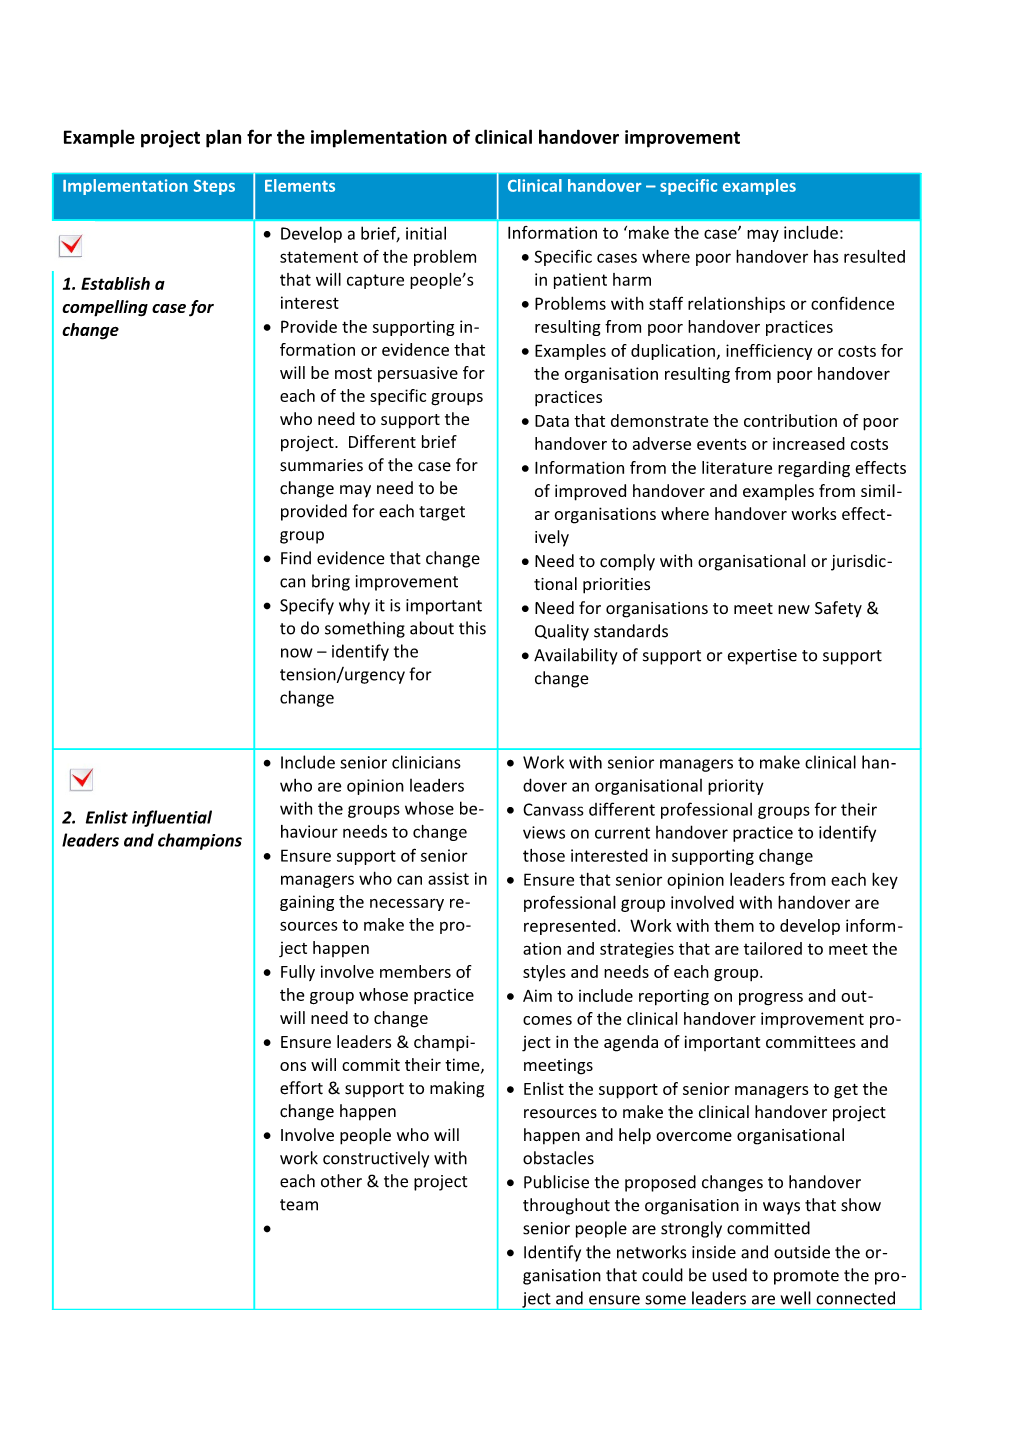 Example Project Plan for the Implementation of Clinical Handover Improvement